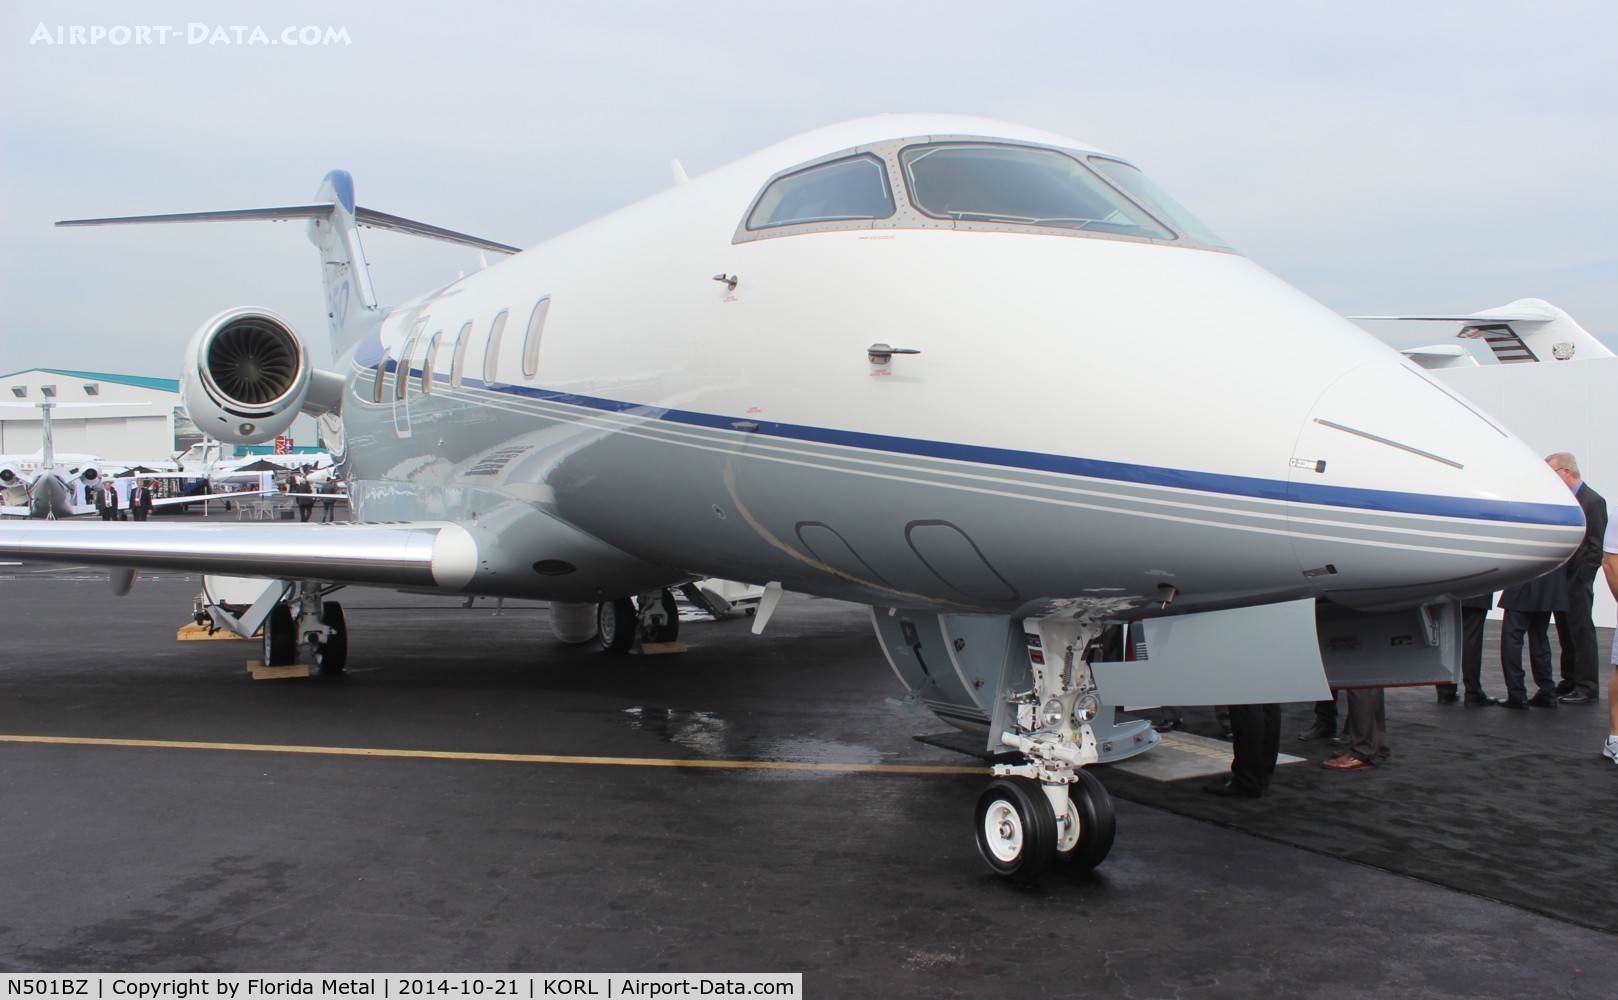 N501BZ, 2014 Bombardier Challenger 350 (BD-100-1A10) C/N 20501, Challenger 350 zx